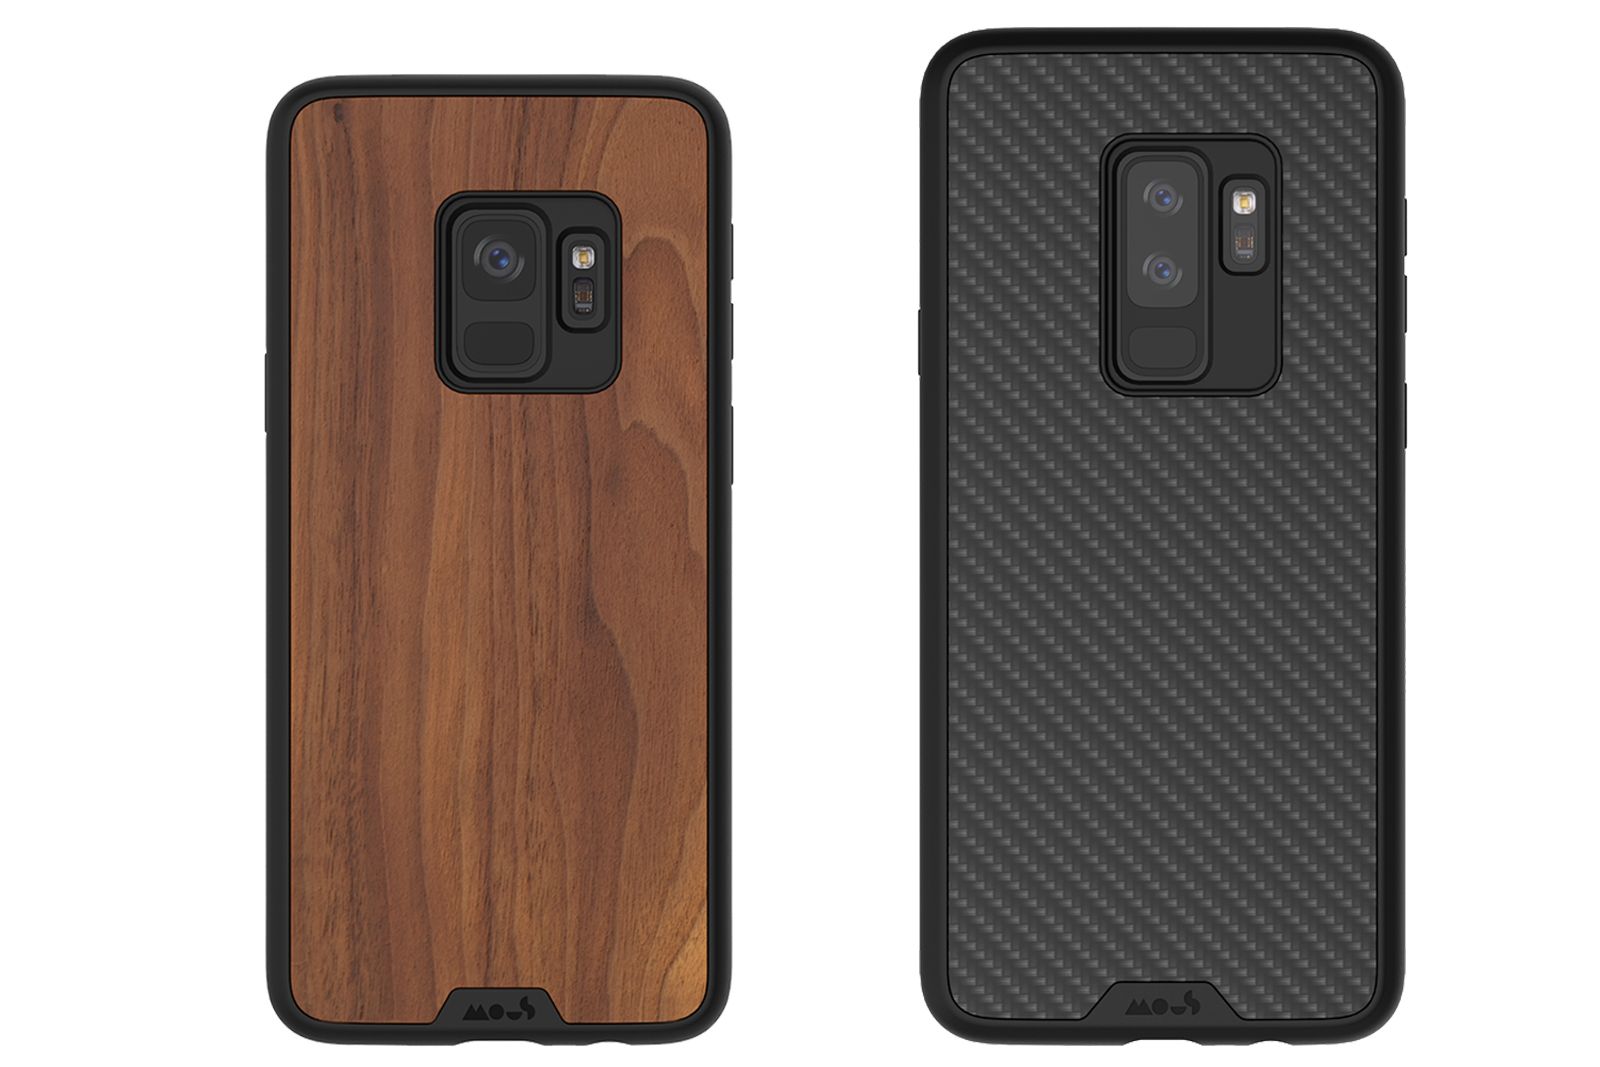 Best Samsung Galaxy S9 and S9 cases Protect your new Galaxy smartphone image 8